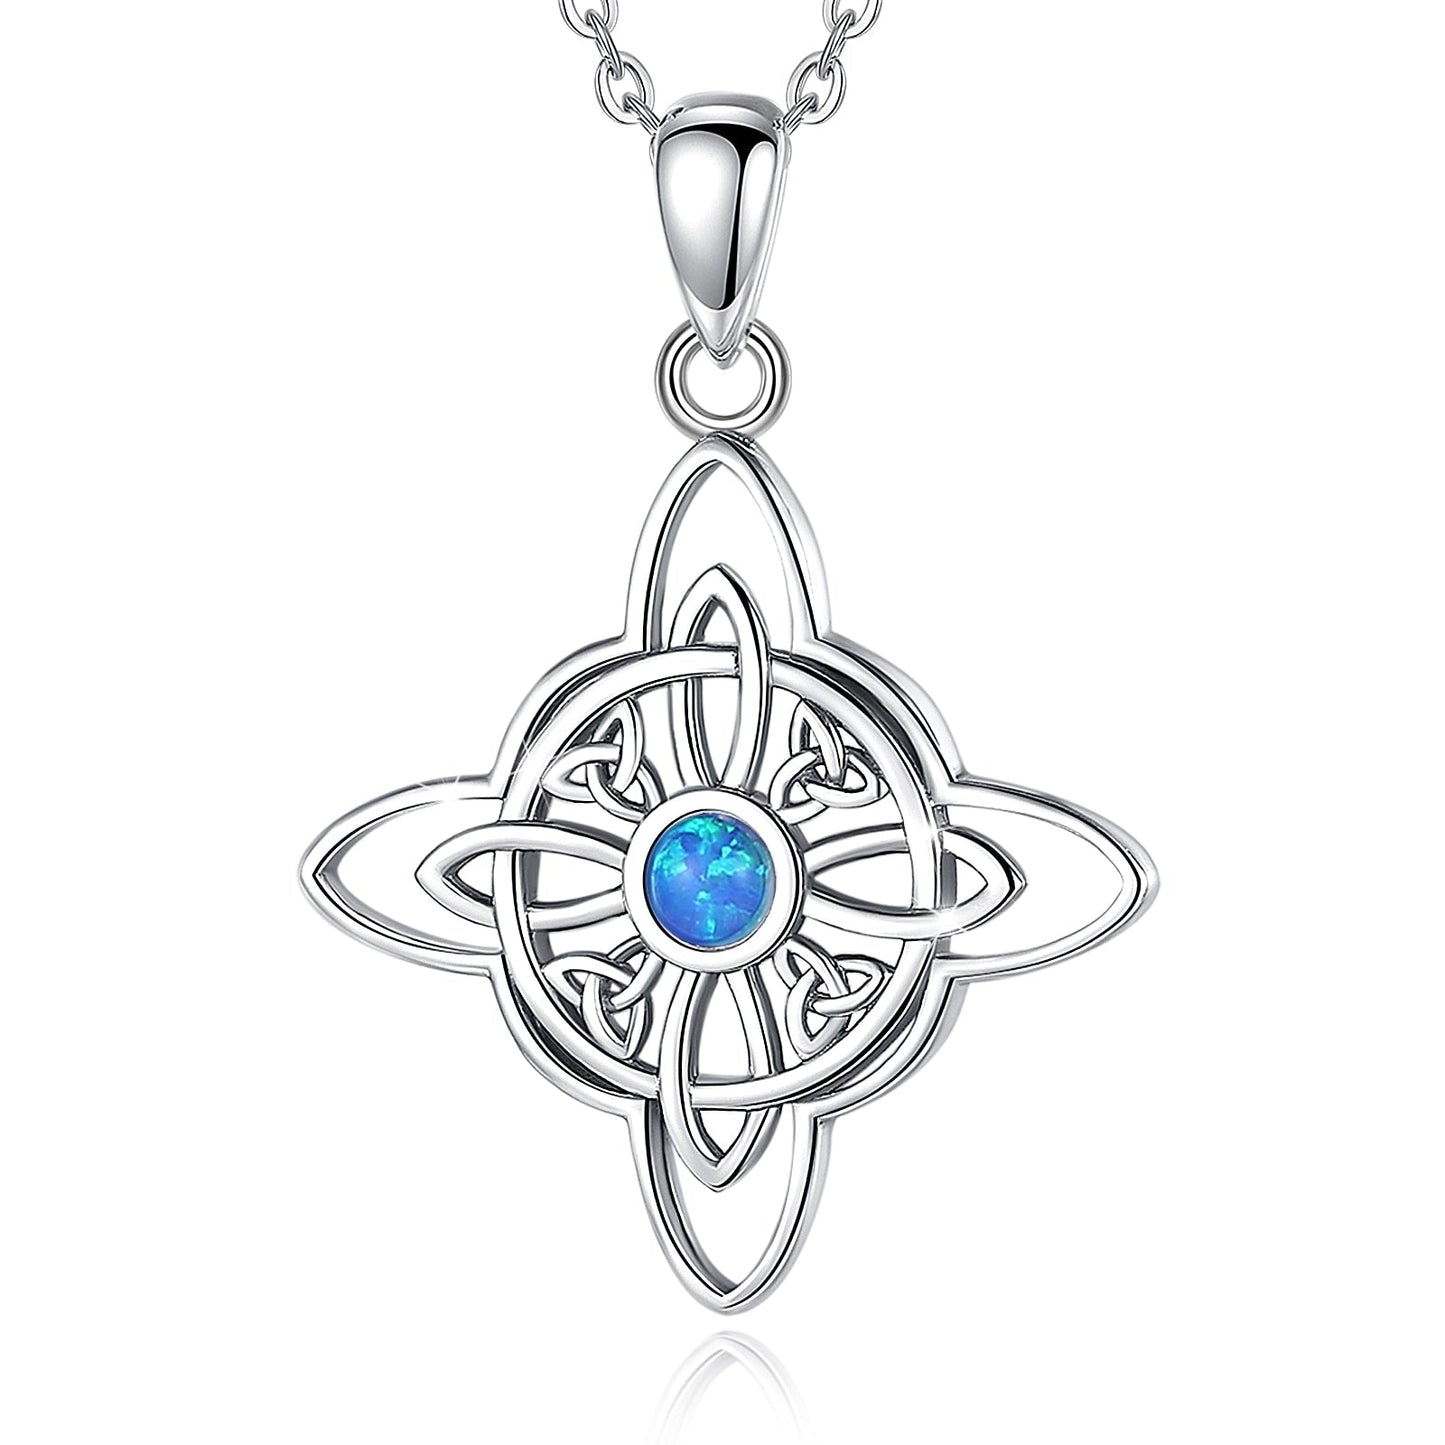 acelimosf™-Witchcraft Celtic Knot Necklace Opal Wicca Amulet Necklace